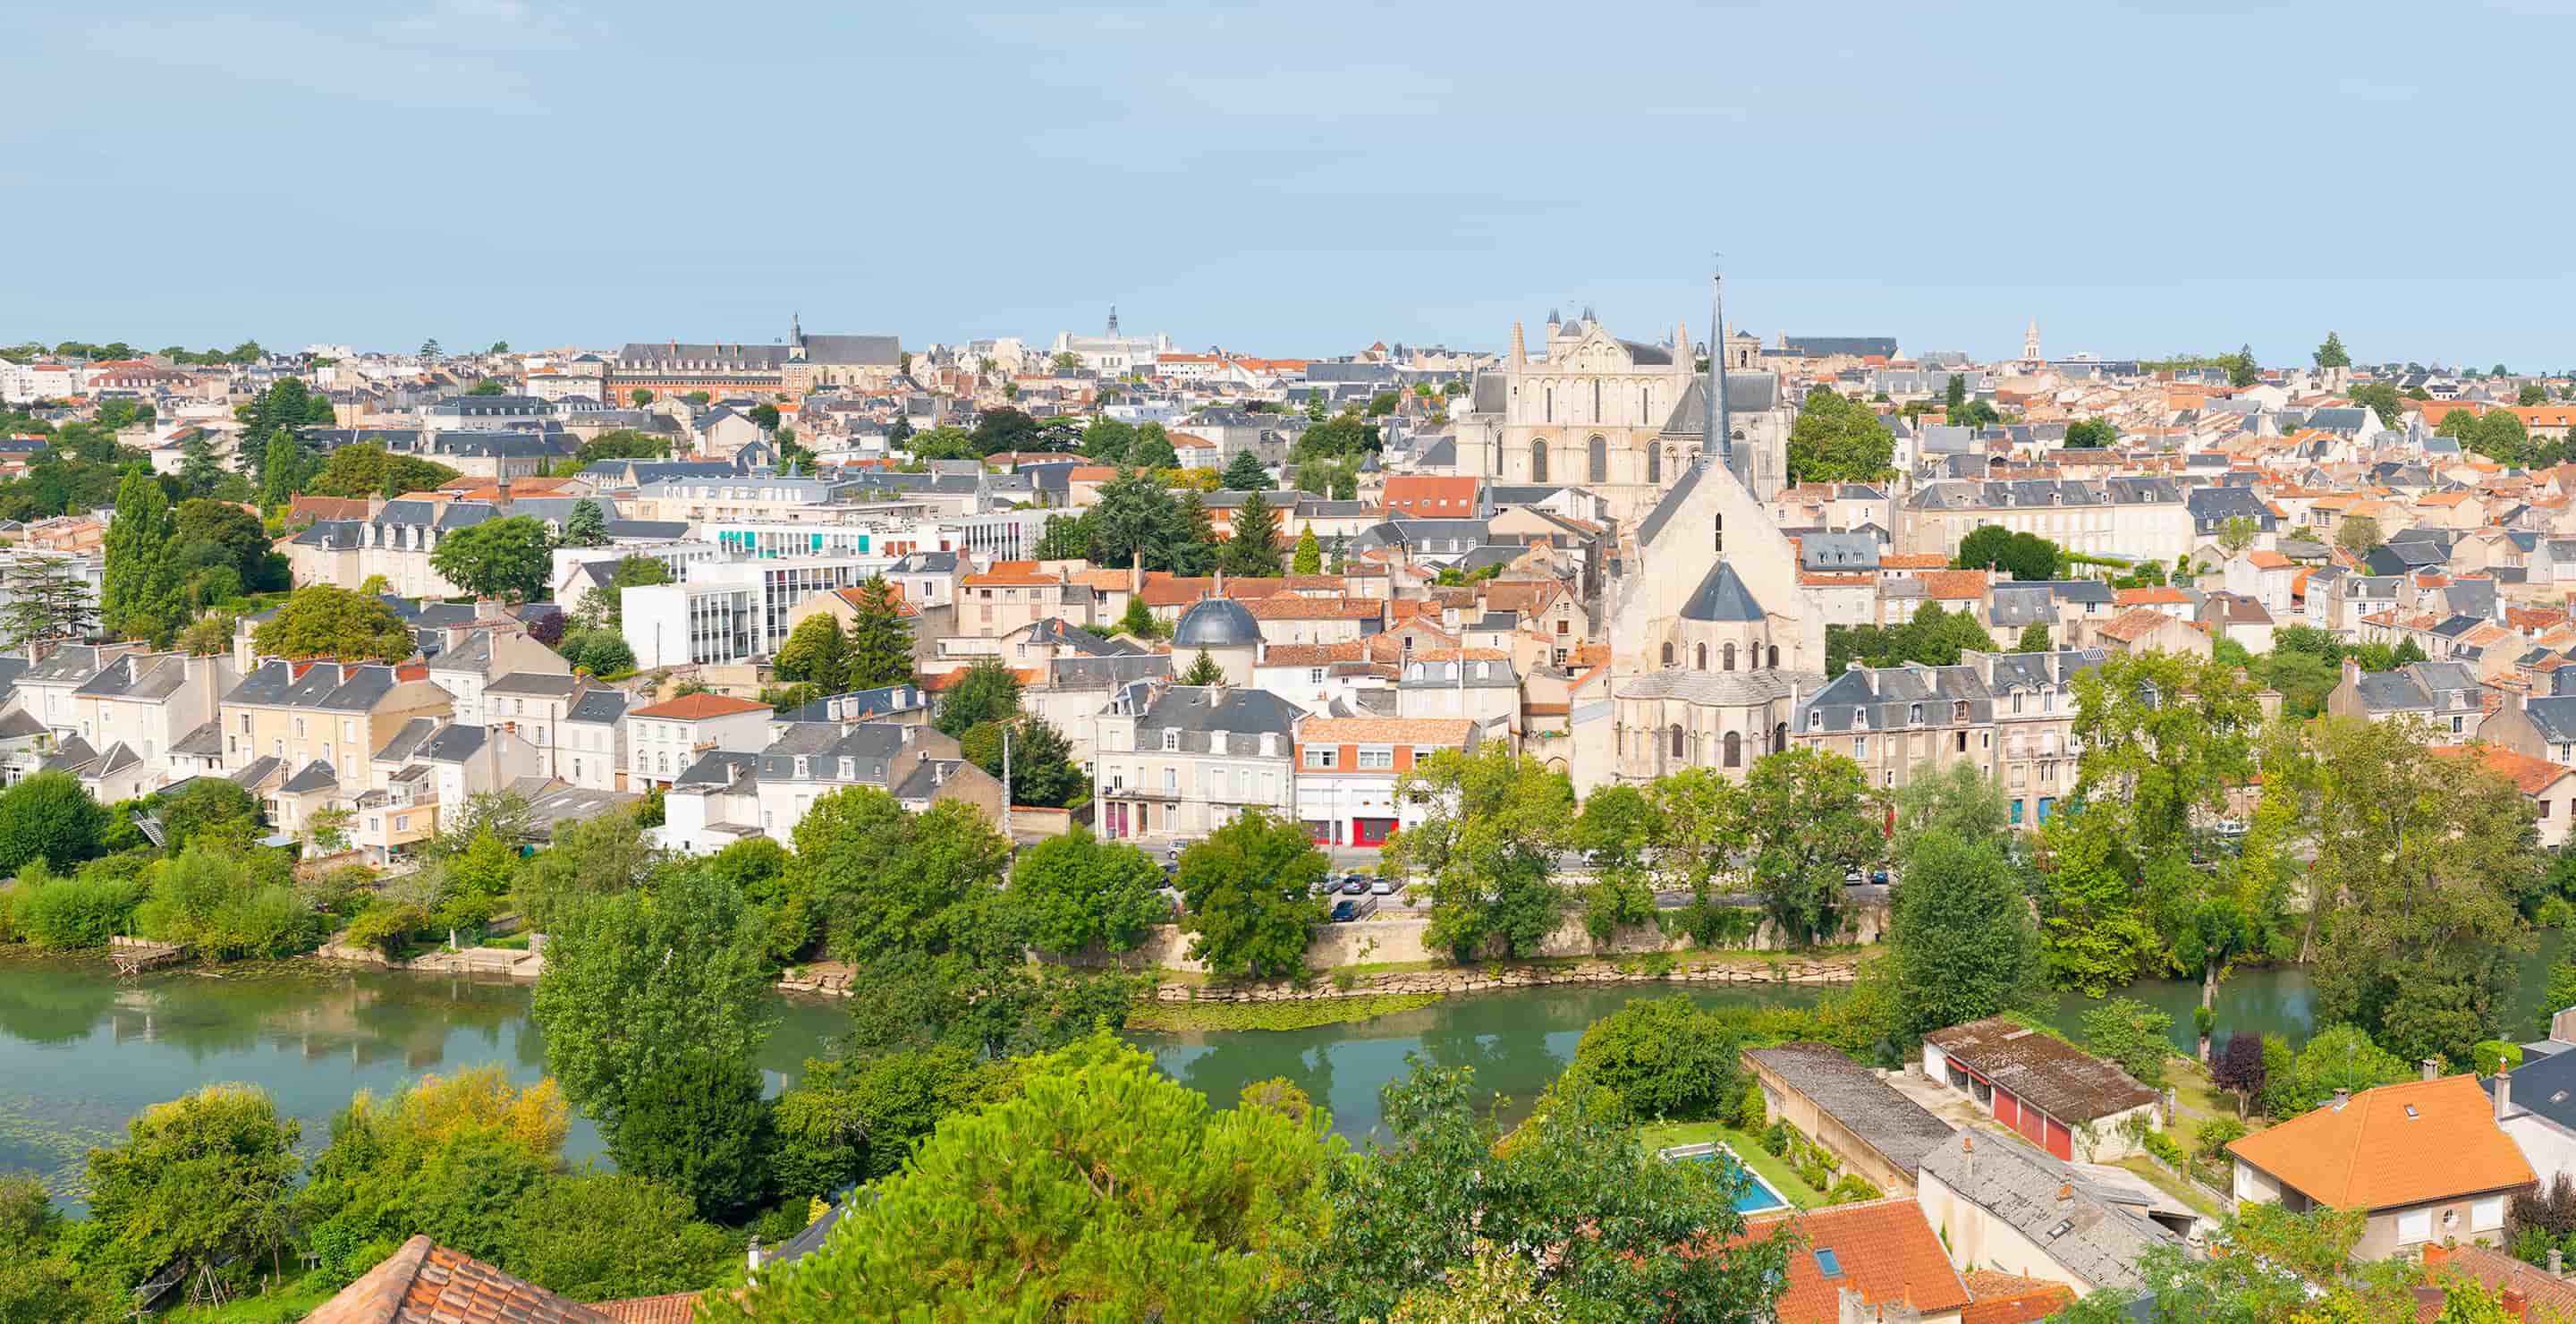 St-Laurent—Fouras to Poitiers by Train from € 15.60 | TGV Tickets & Times |  Trainline